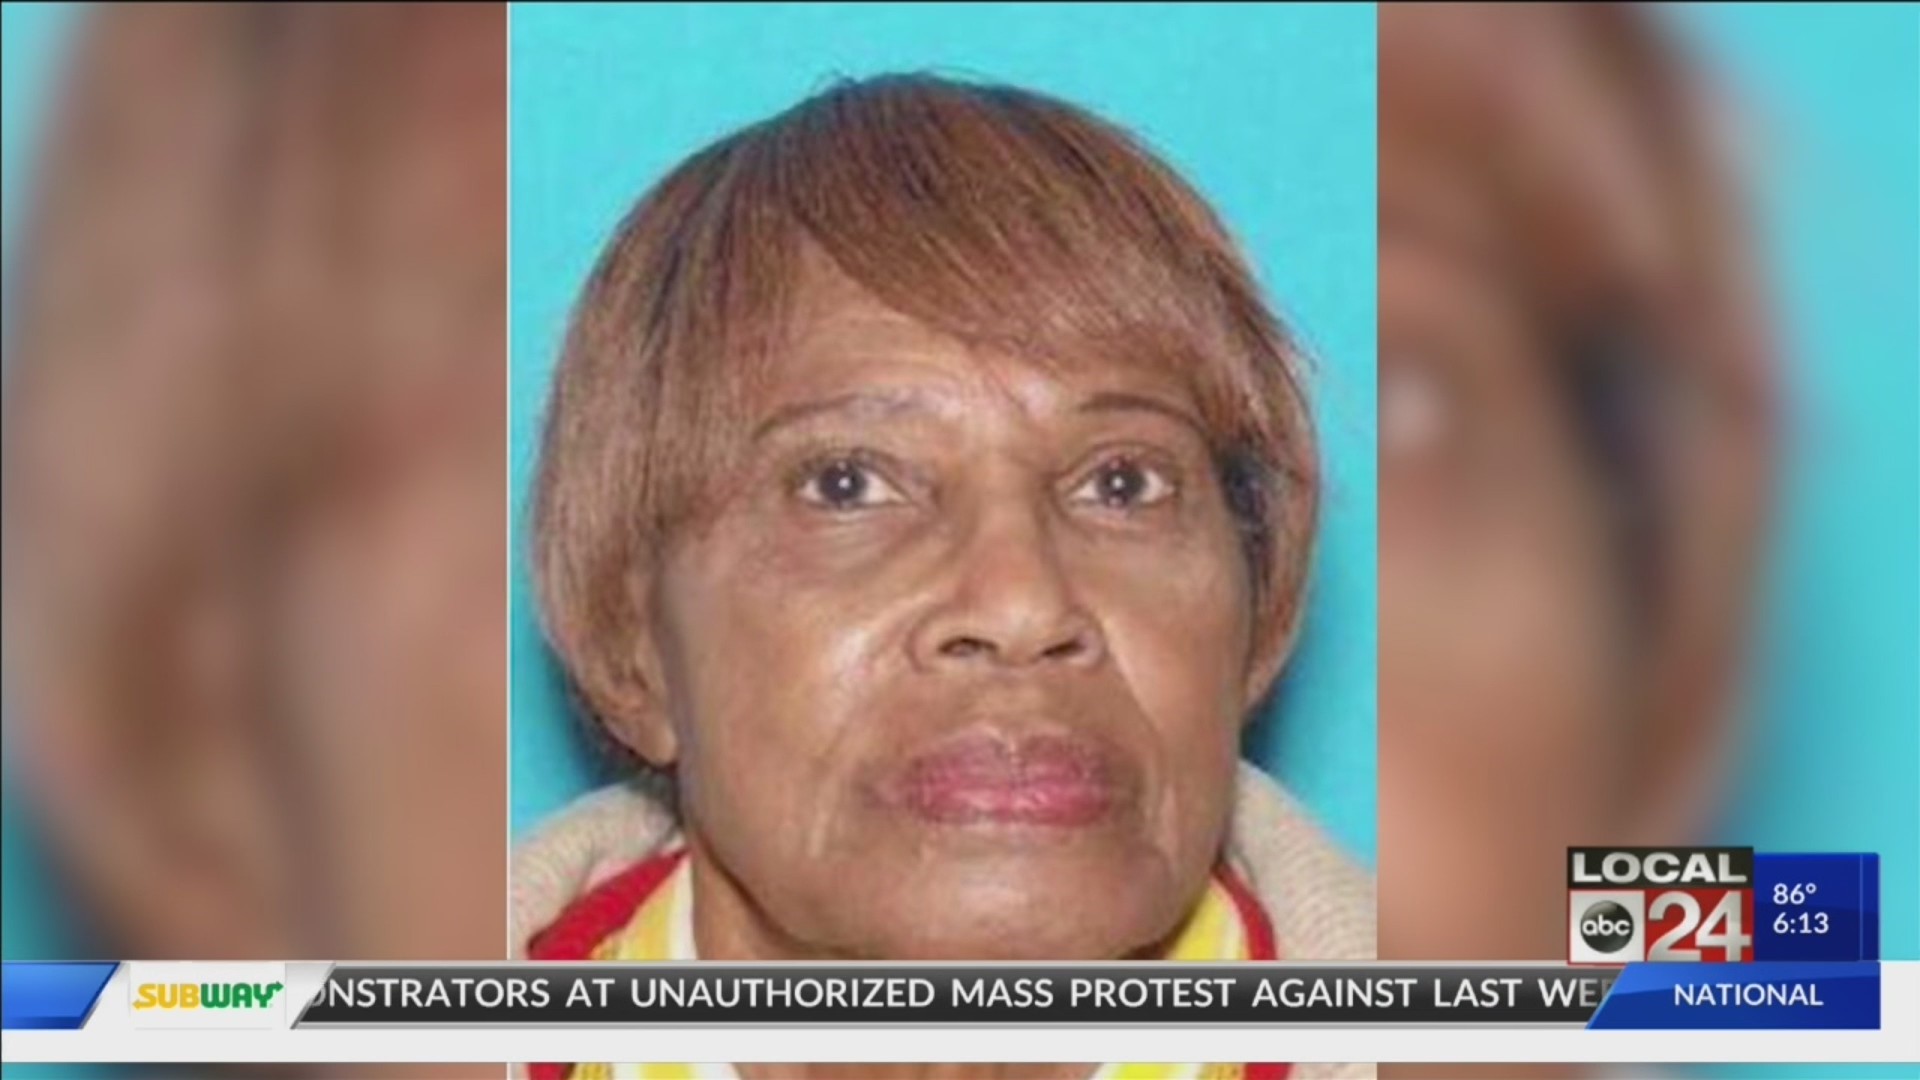 Reward increased to $15,000 for 85-year-old Pandora Duckett, missing since January